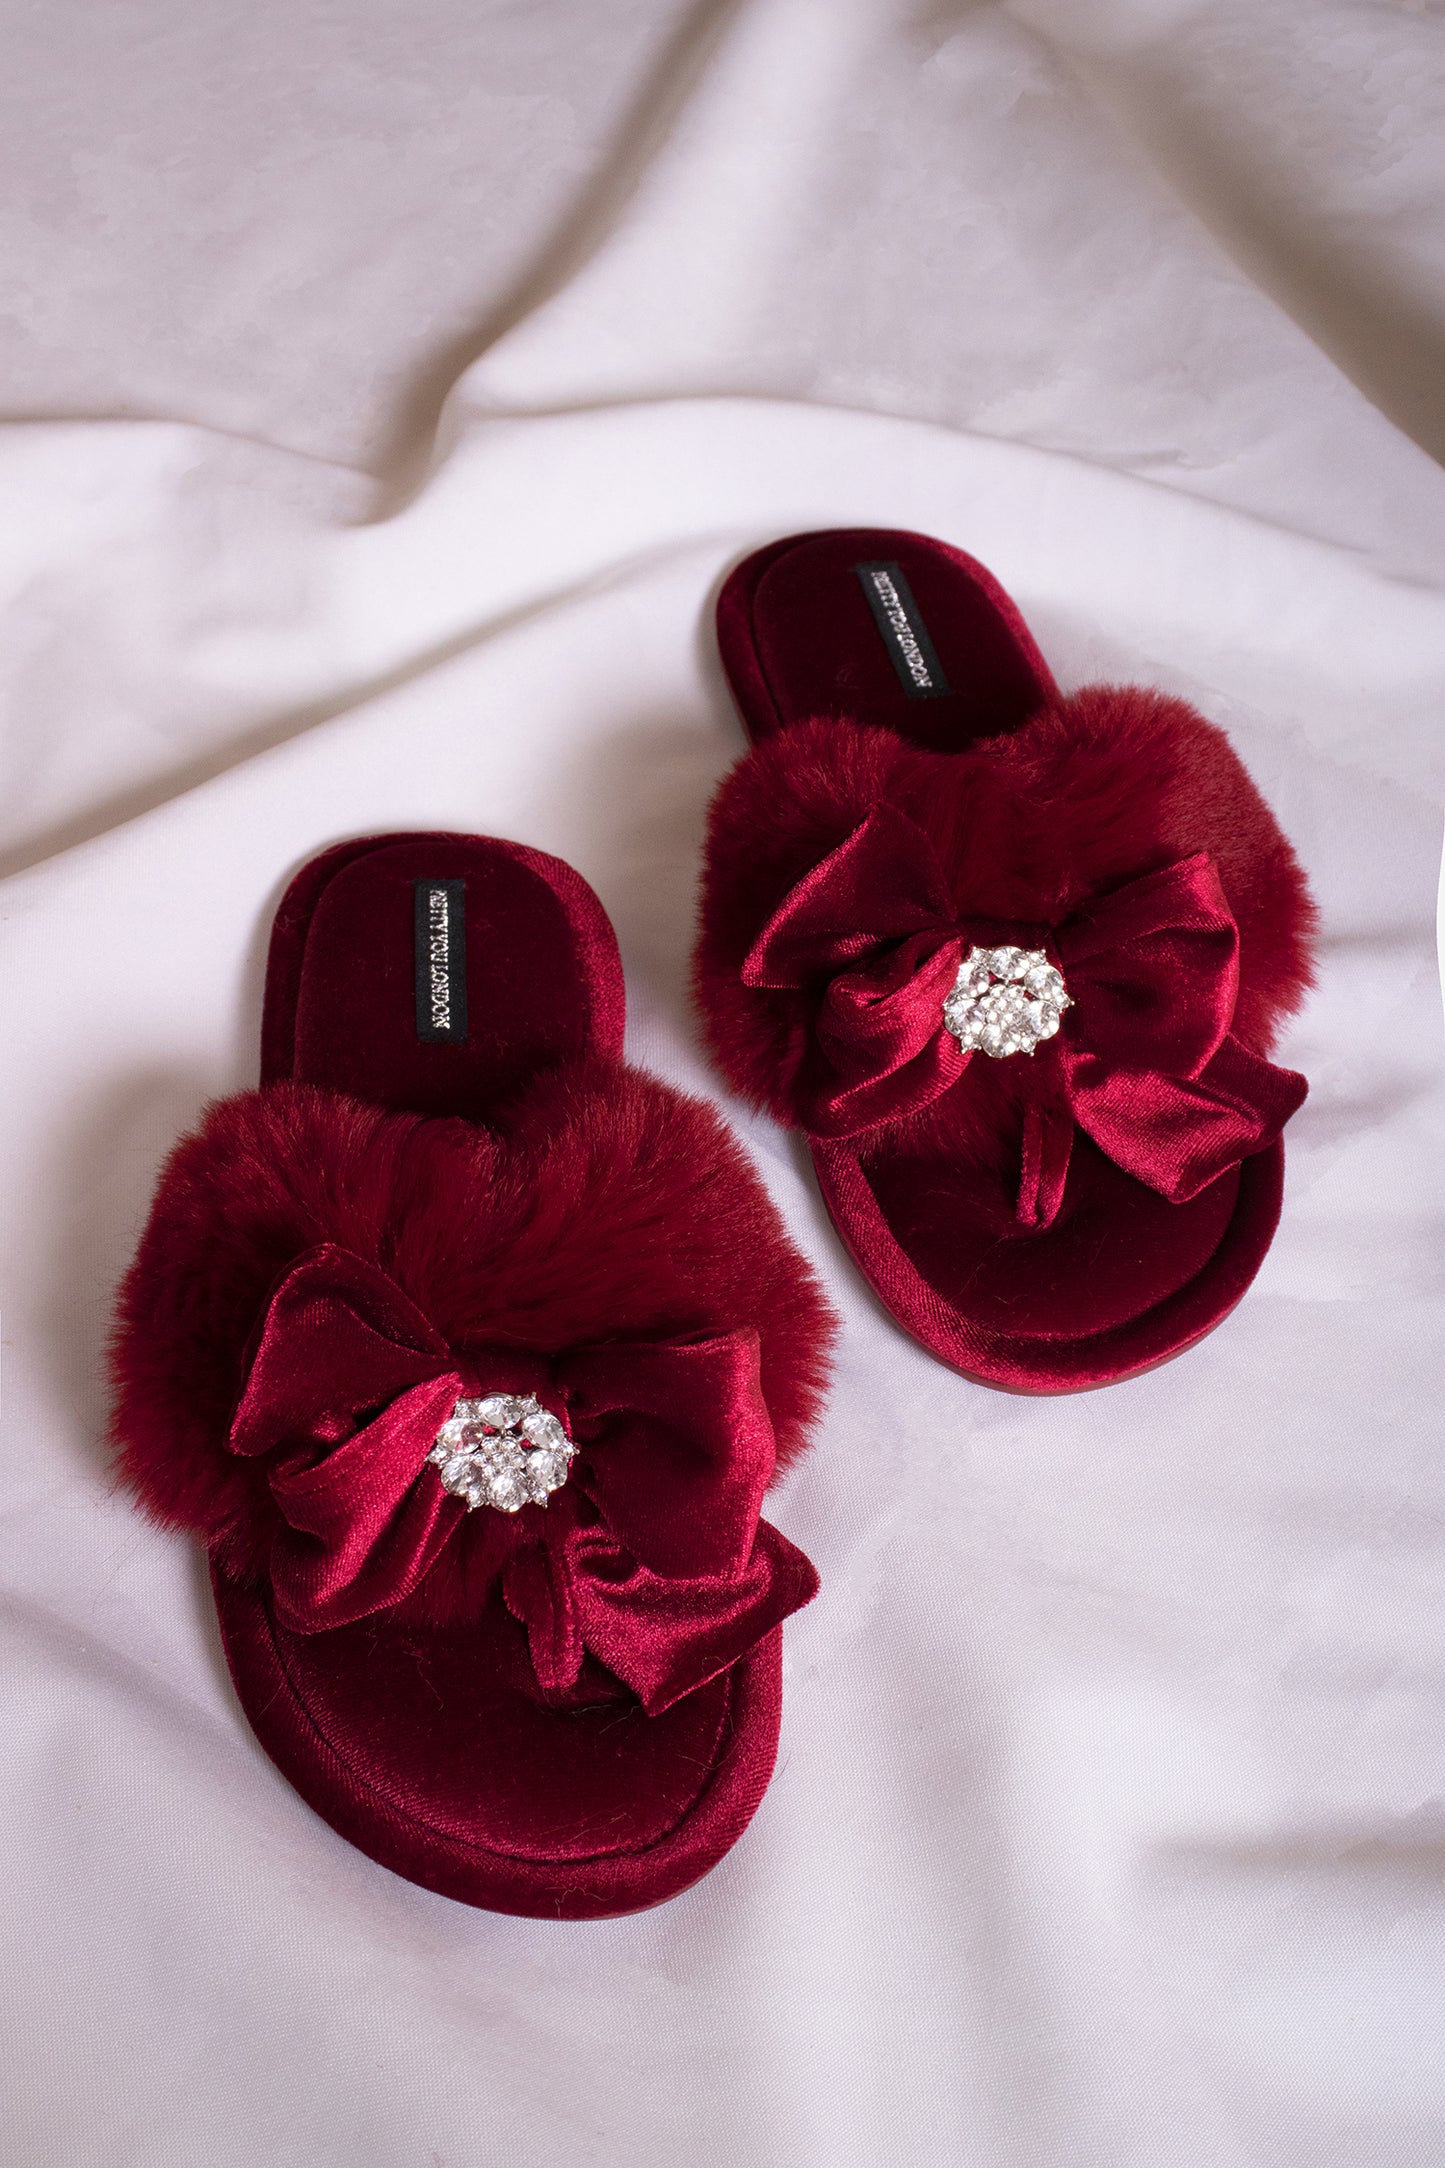 Amelie women's toe post slippers in red with a premium velvet bow and diamante embellishment atop a plush faux fur band from Pretty You London